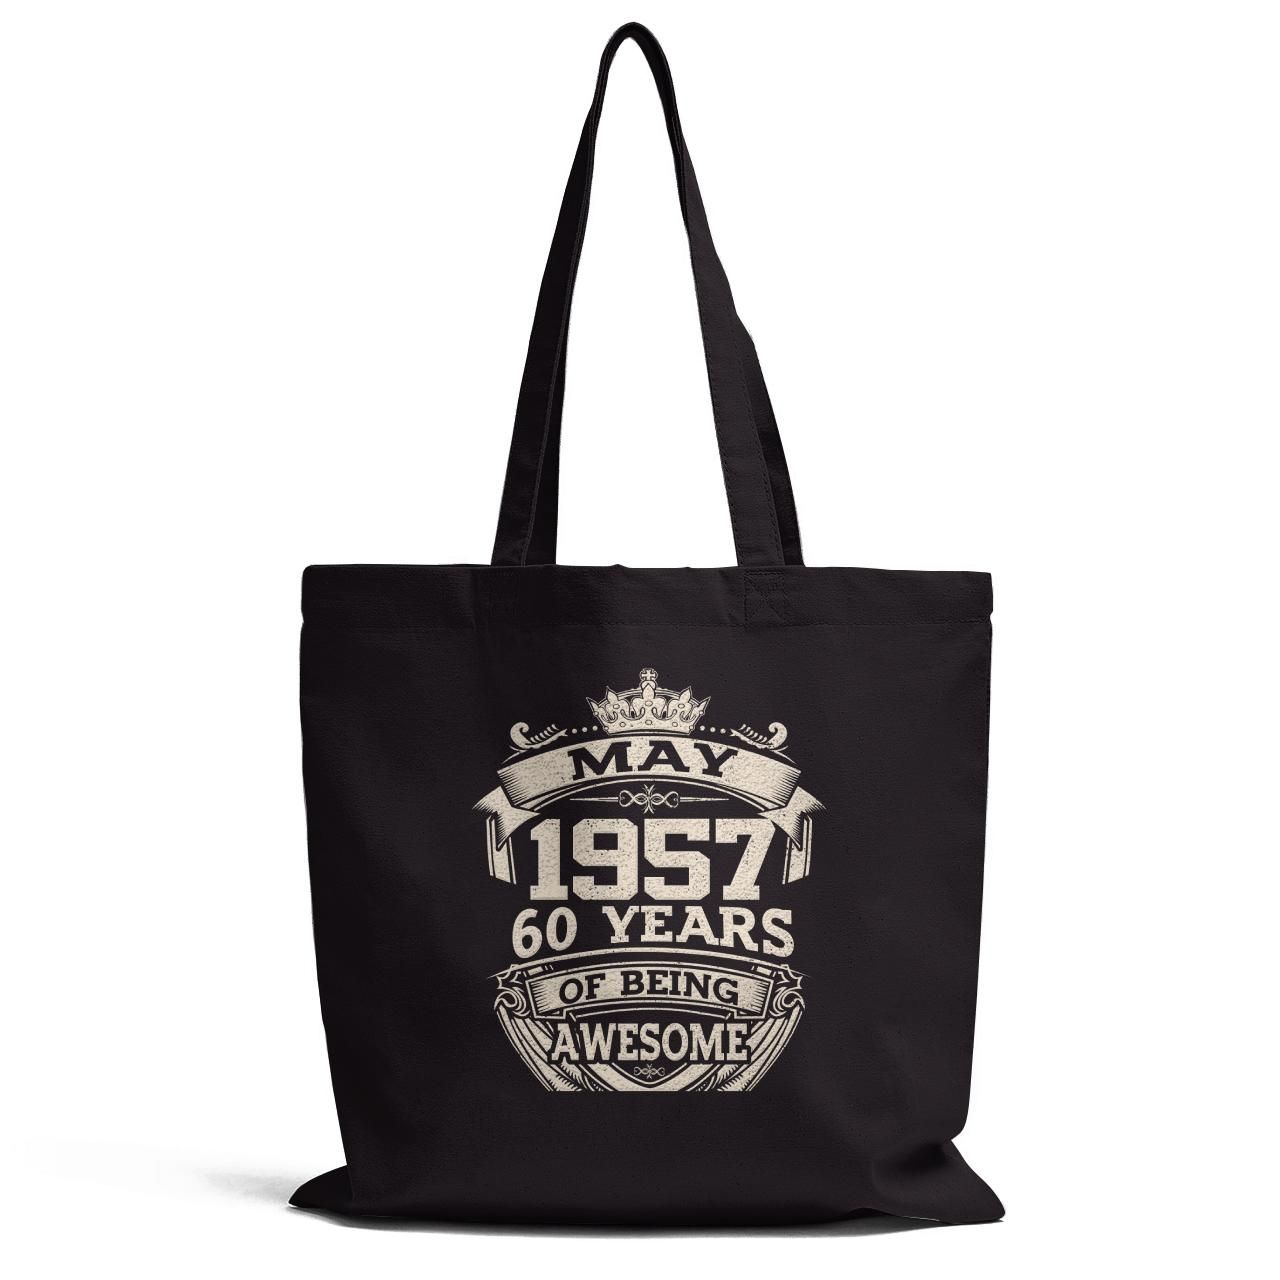 May 1957 60 Years Of Being Awesome Tote Bag